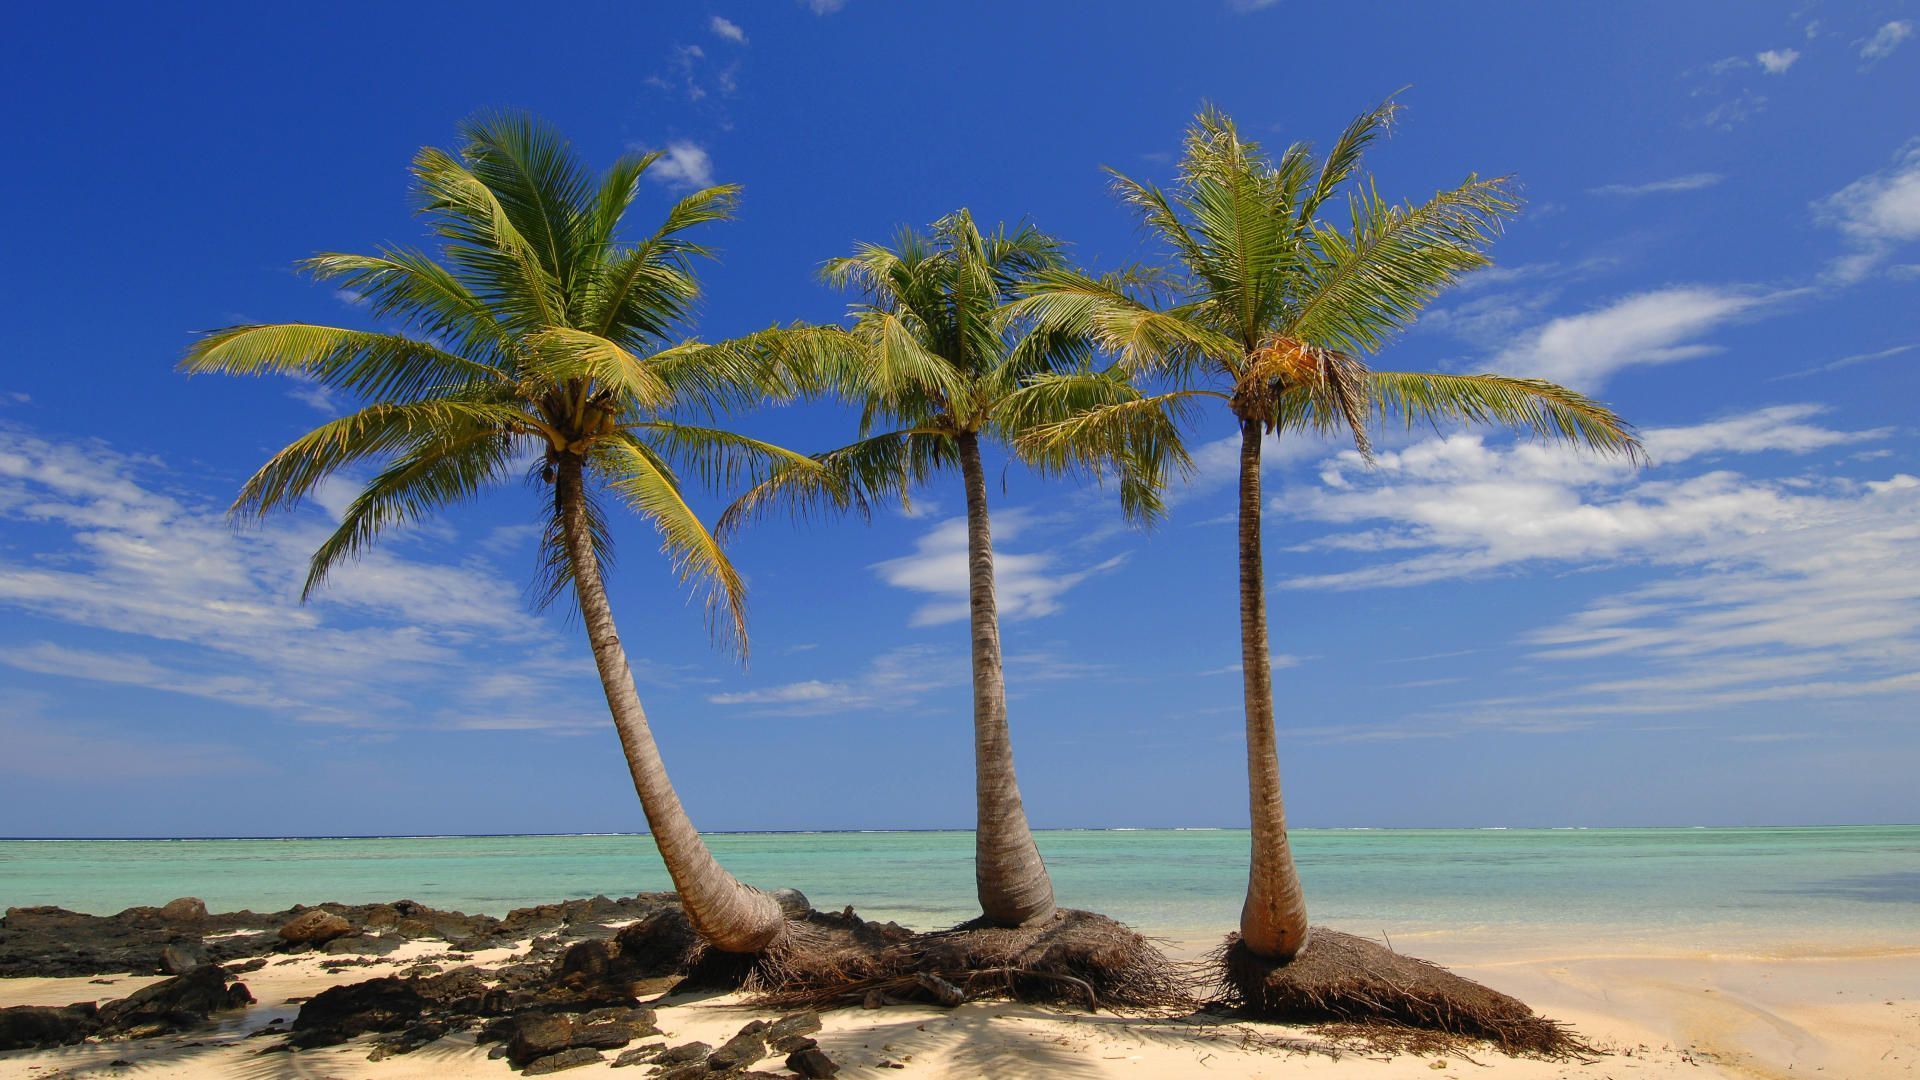 Palms Isl Madagascar Nature Background wallpapers HD free   118394